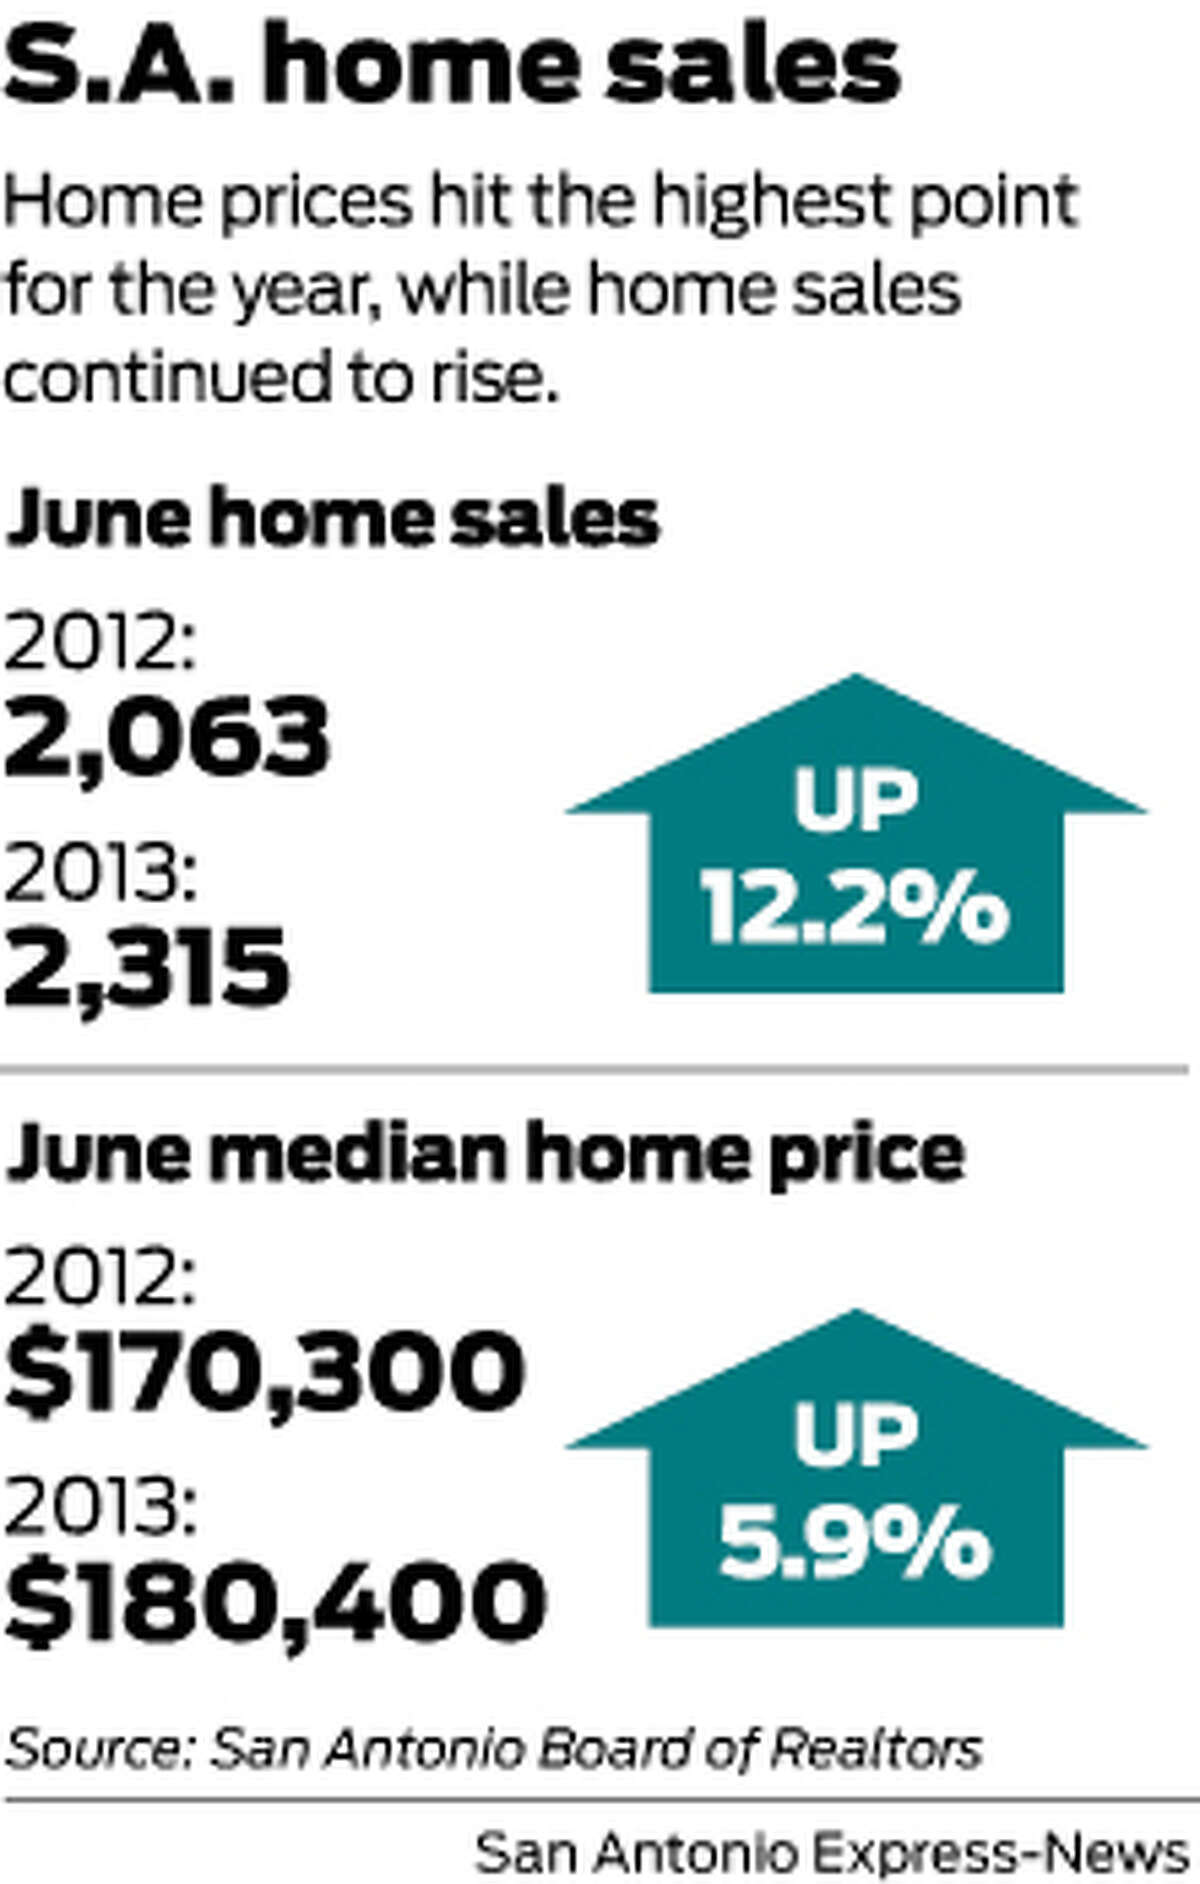 Home prices hit the highest point for the year, while home sales continued to rise.